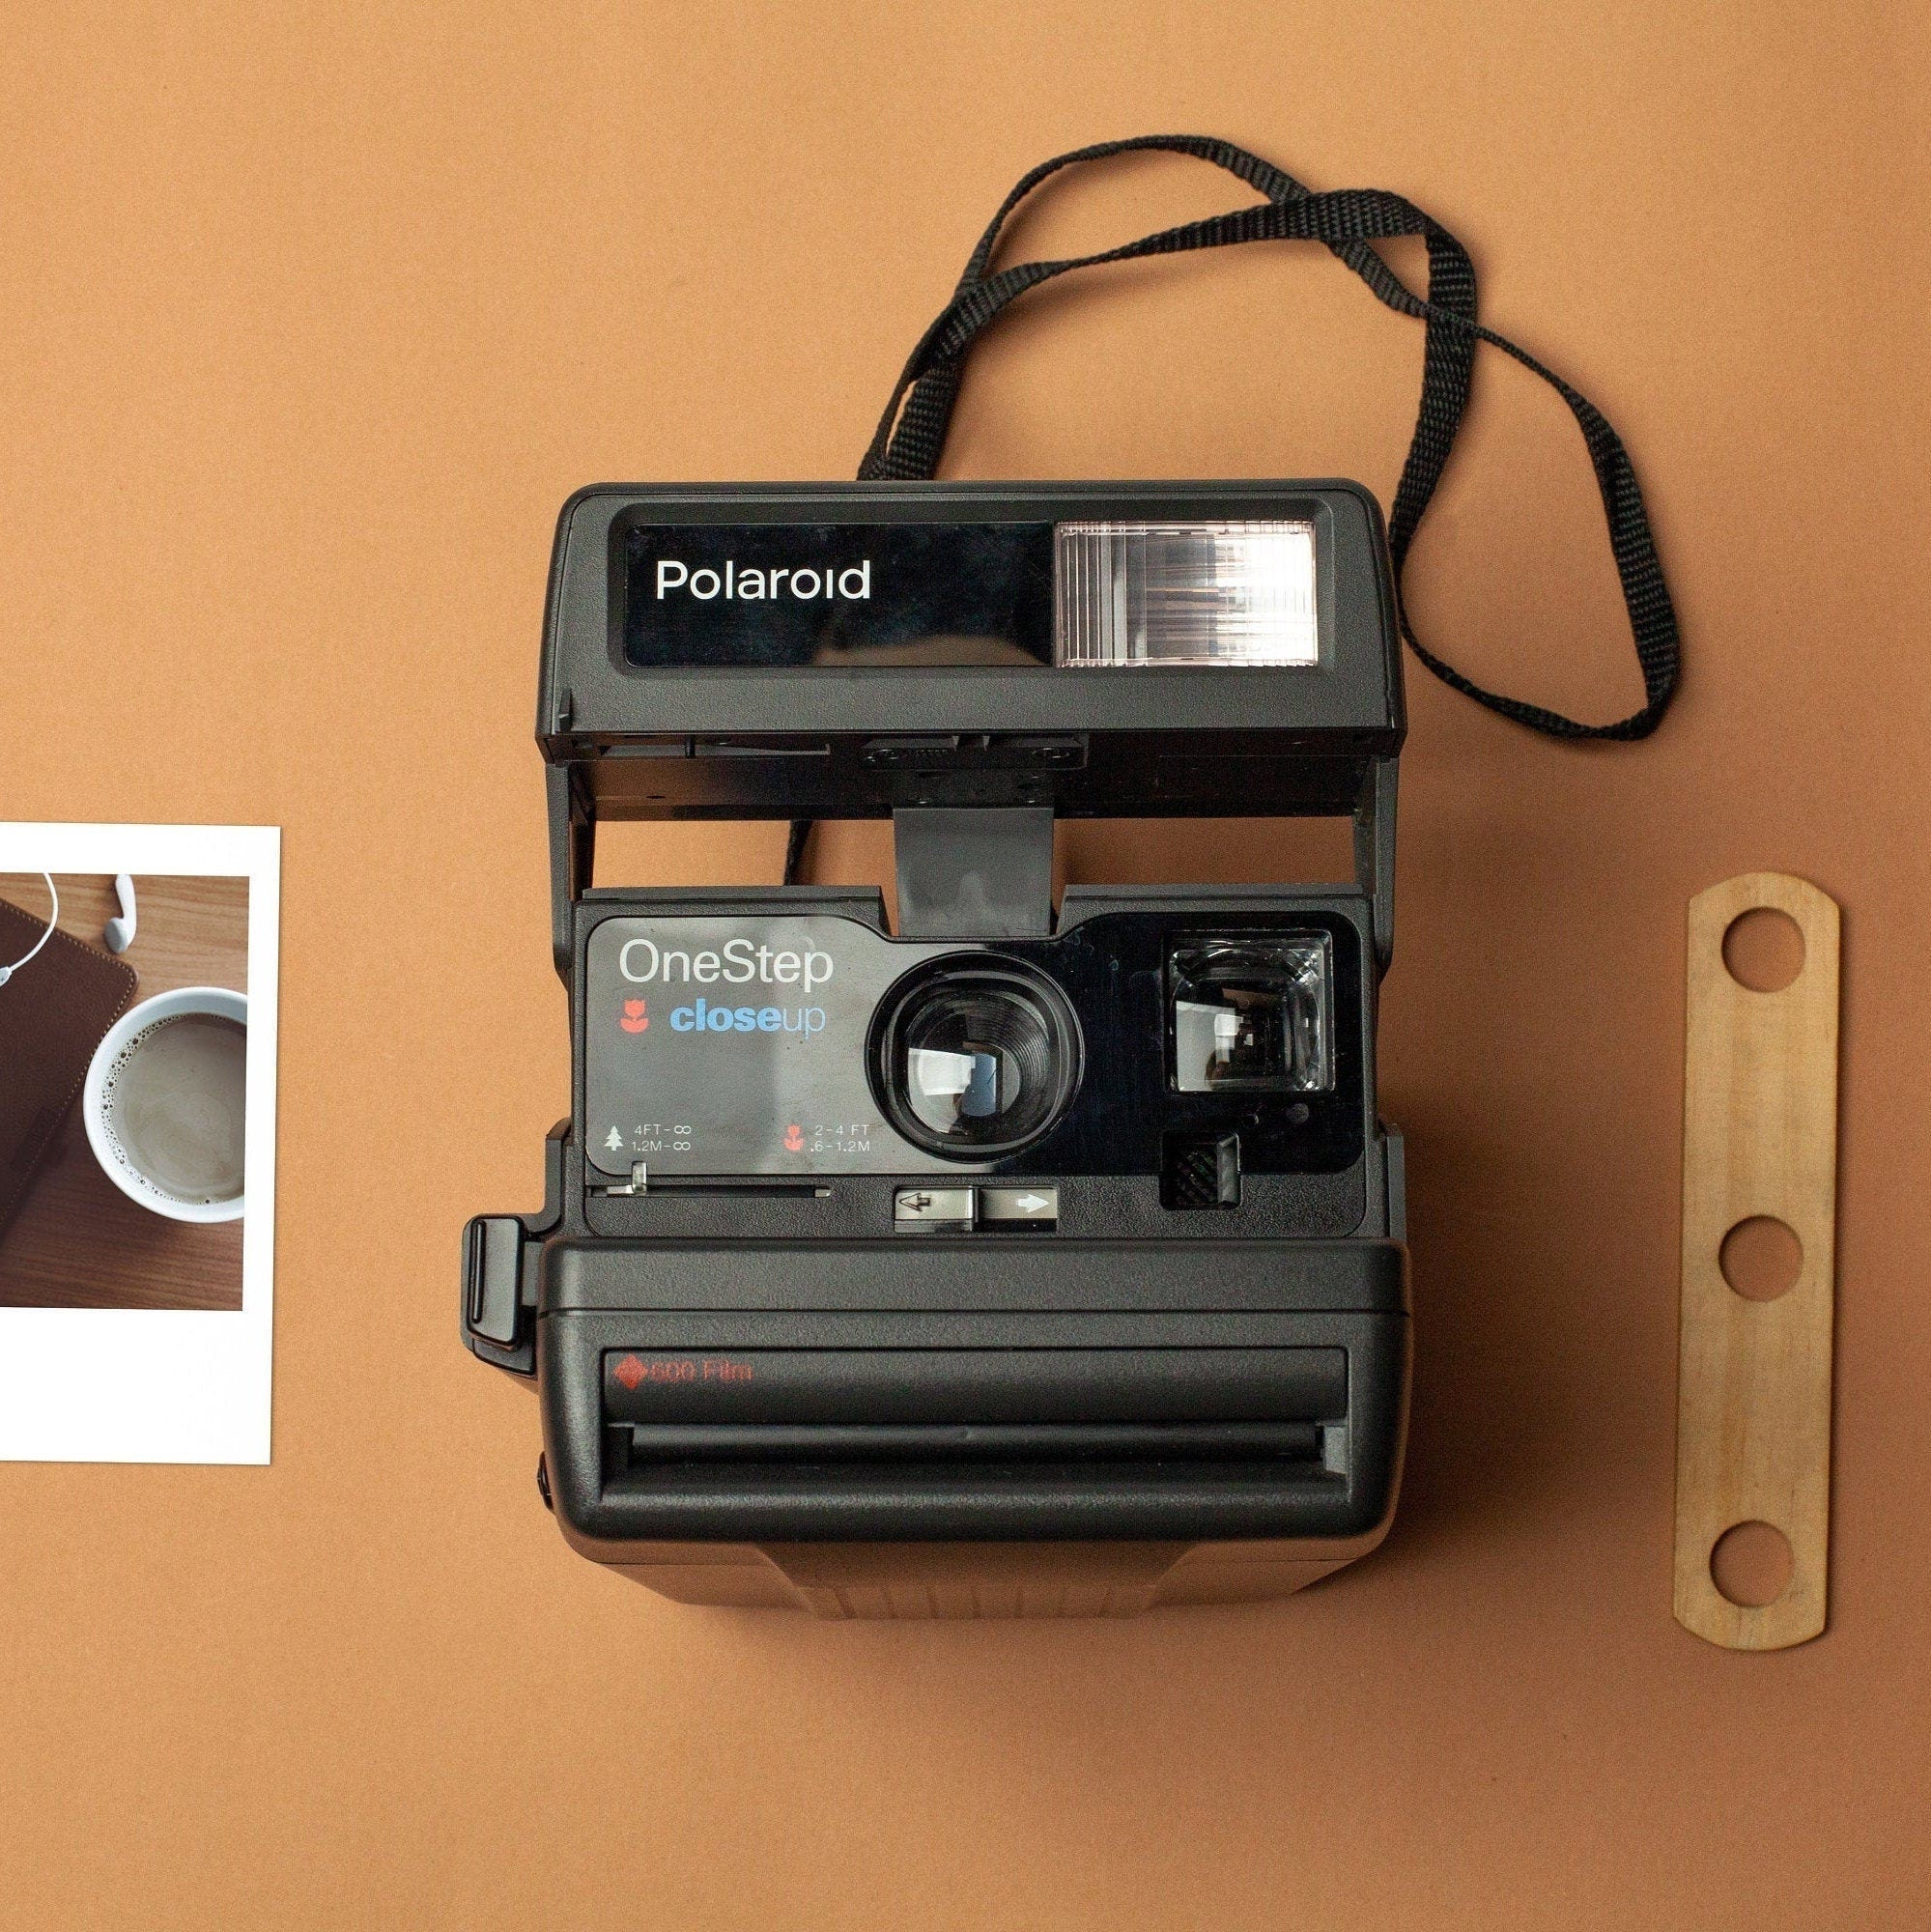 Polaroid's OneStep2 Is a Vintage Camera for the Digital Age